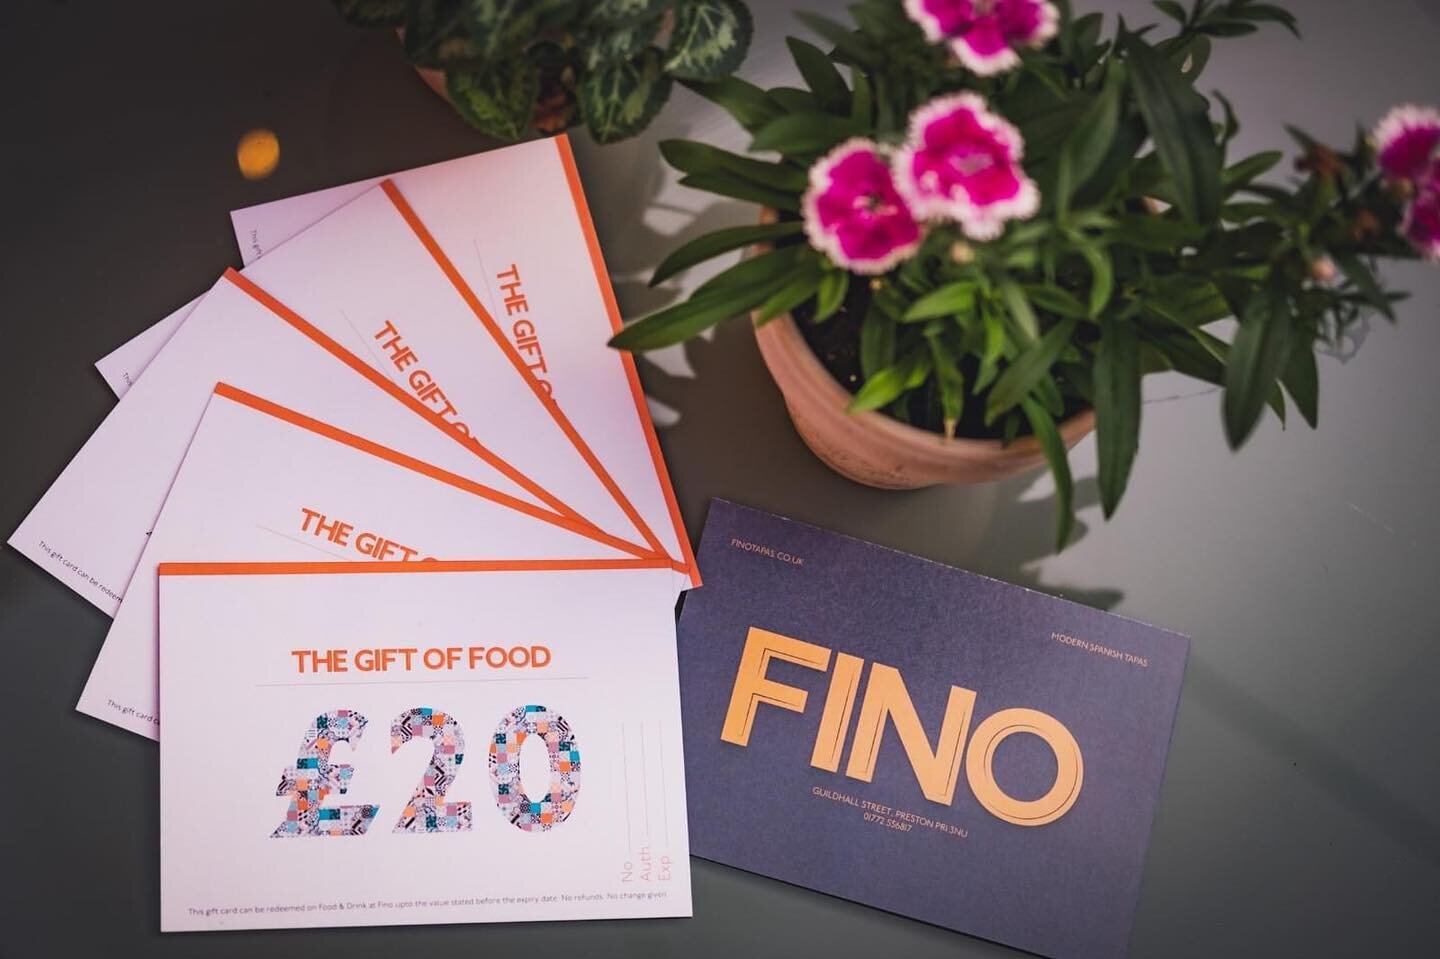 🥂 ℂ𝕆𝕄ℙ𝔼𝕋𝕀𝕋𝕀𝕆ℕ 🥂

WIN &pound;100 FINO TAPAS VOUCHER!

Our brand new Gift Vouchers are now available to buy from our restaurant on Guildhall St. As our way of celebrating and saying thank you to all our lovely customers and followers, we're d